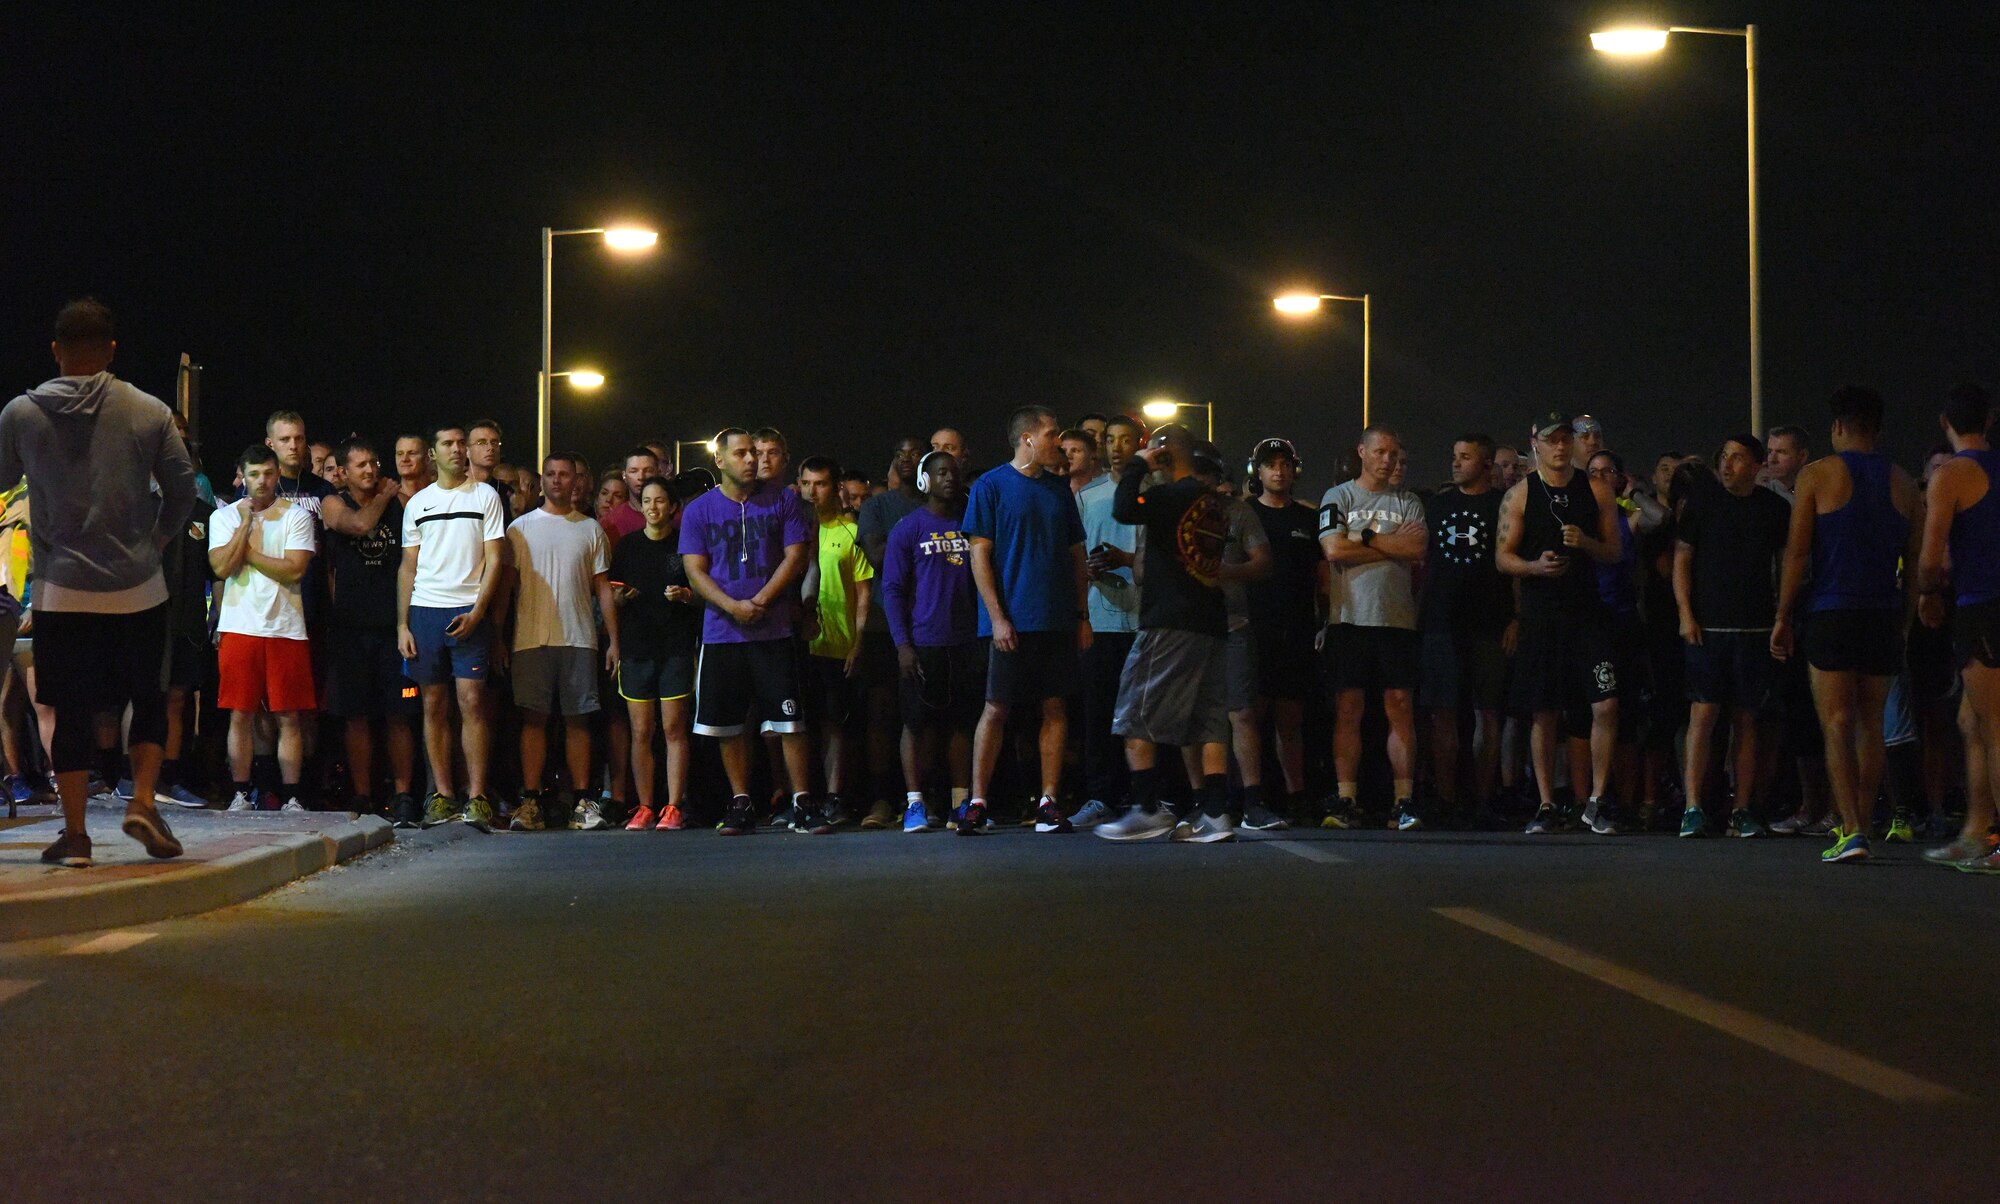 Base personnel fill the starting line of a 5K race commemorating the 75th anniversary of the attack on Pearl Harbor at Al Udeid Air Base, Qatar, Dec. 7, 2016. Participants used the anniversary as an opportunity to come together and honor the sacrifice and dedication of those who perished and those who survived the attack, both civilian and military. (U.S. Air Force photo by Senior Airman Cynthia A. Innocenti)